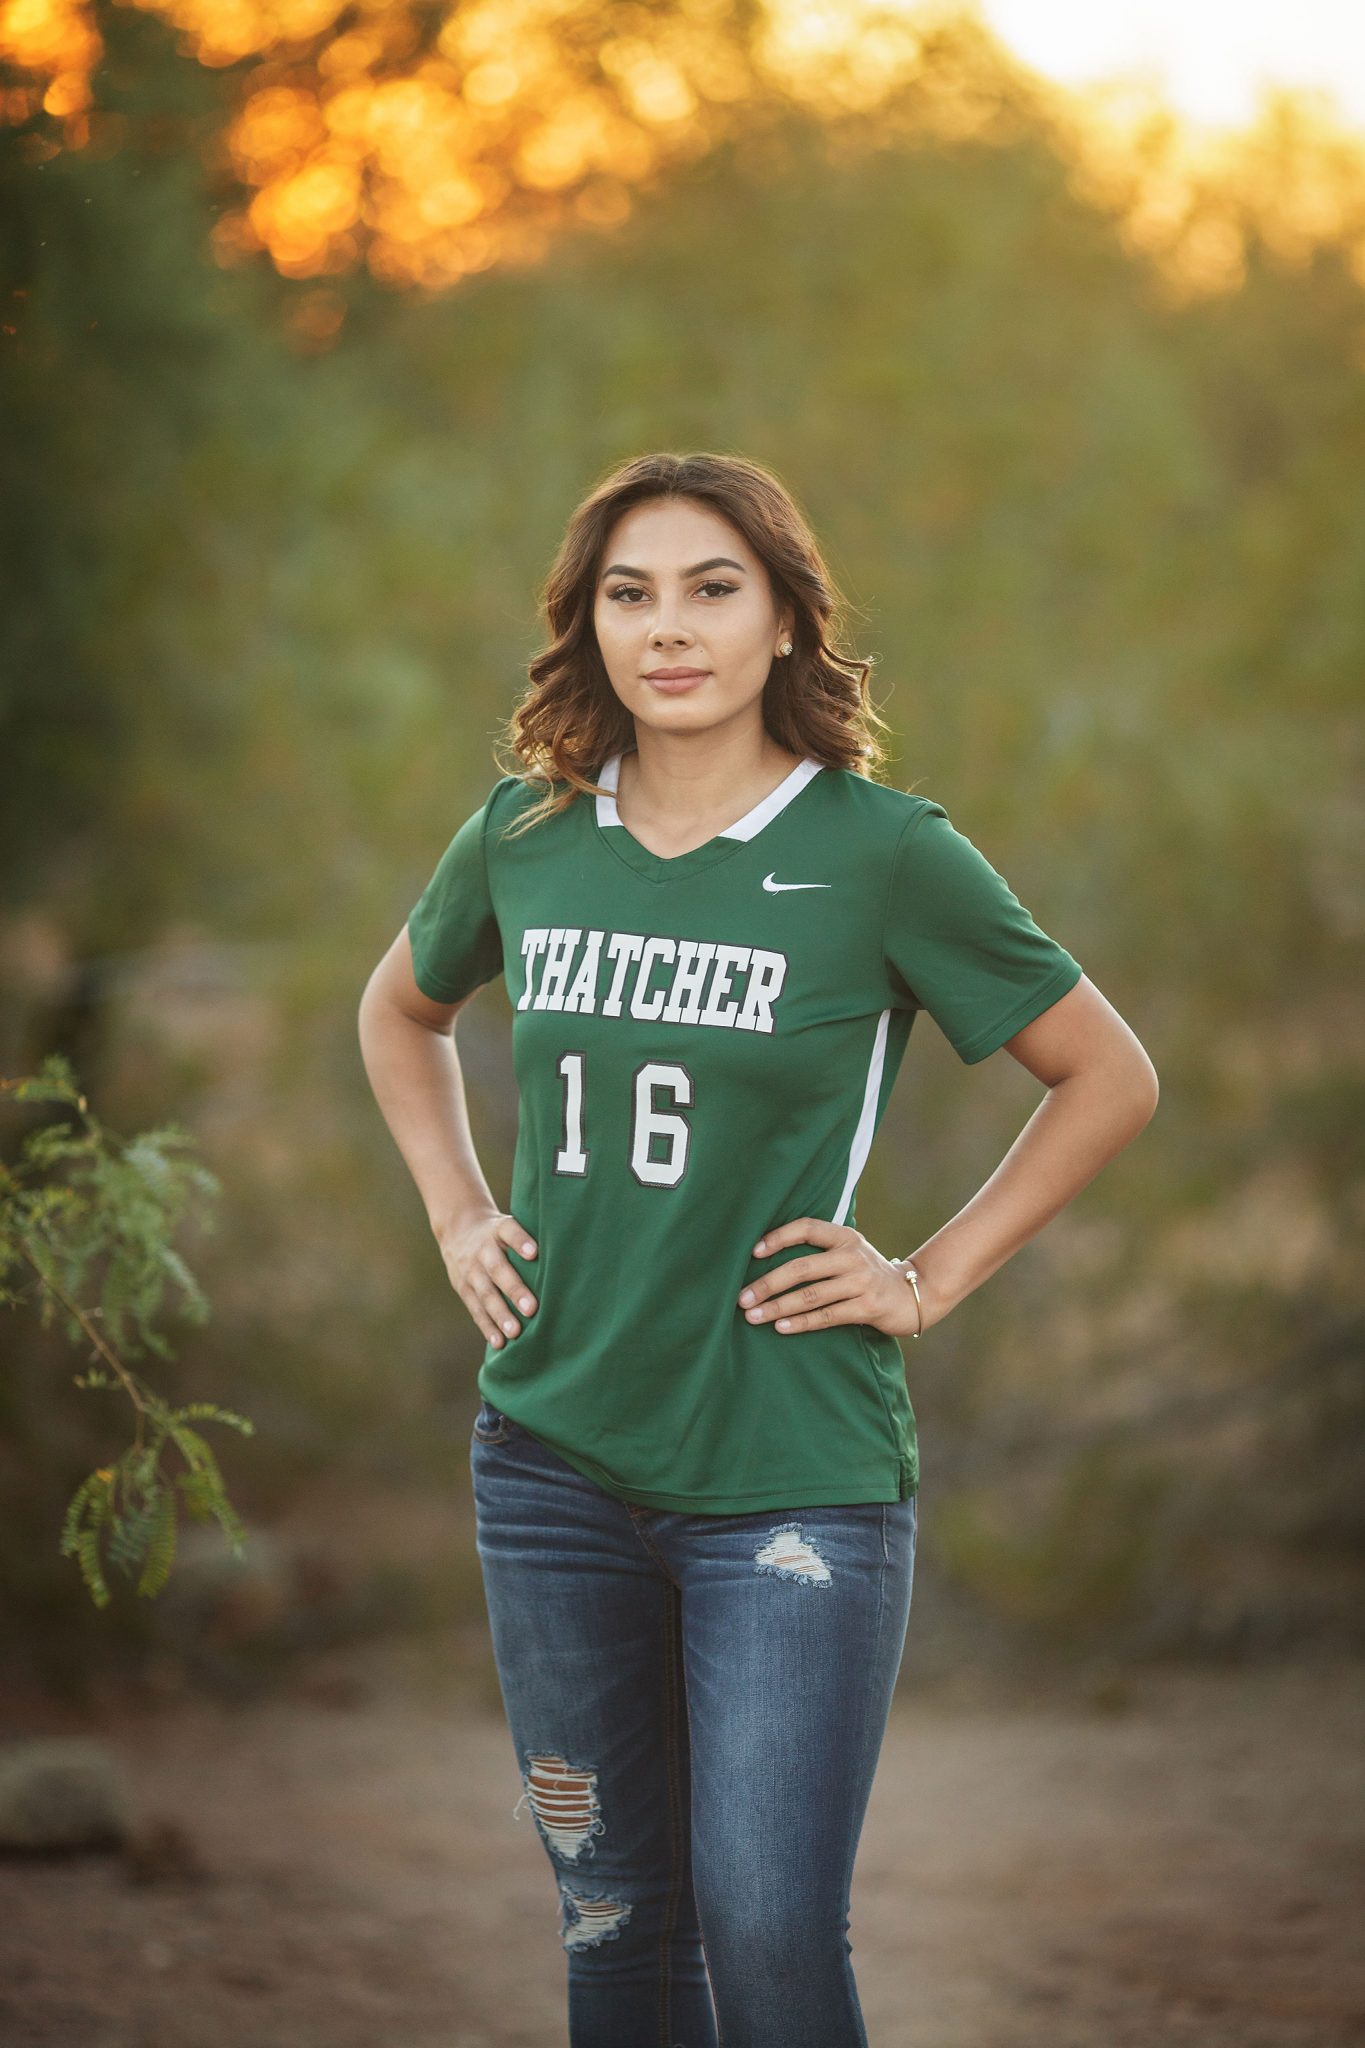 Soccer senior photo pictures at papago Park